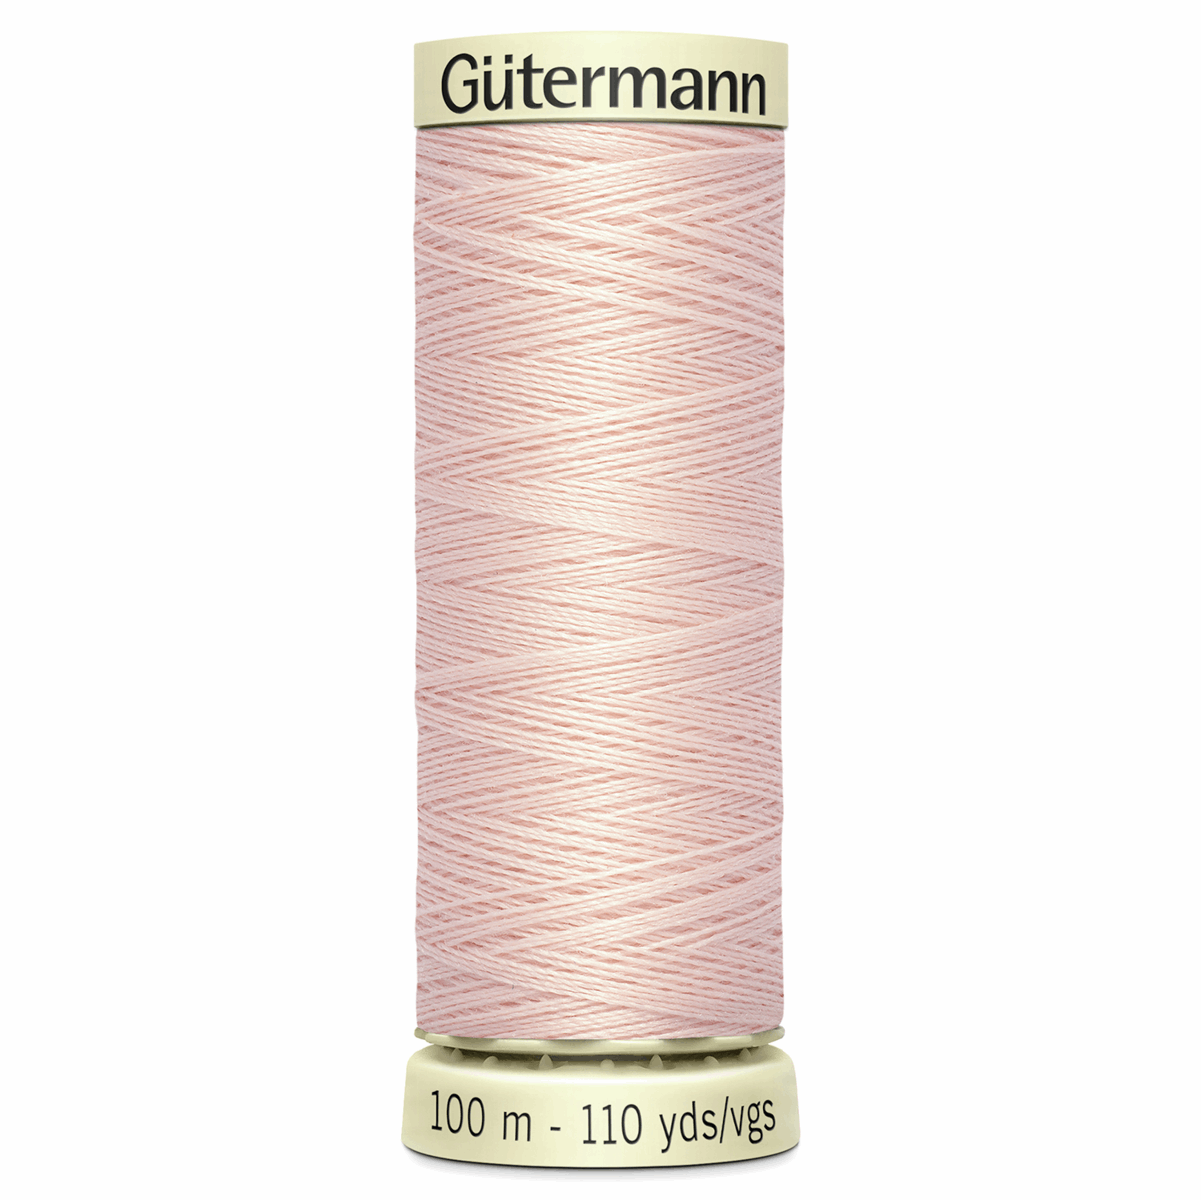 Gutermann Sew-All Thread 100m - French Nude (#658)